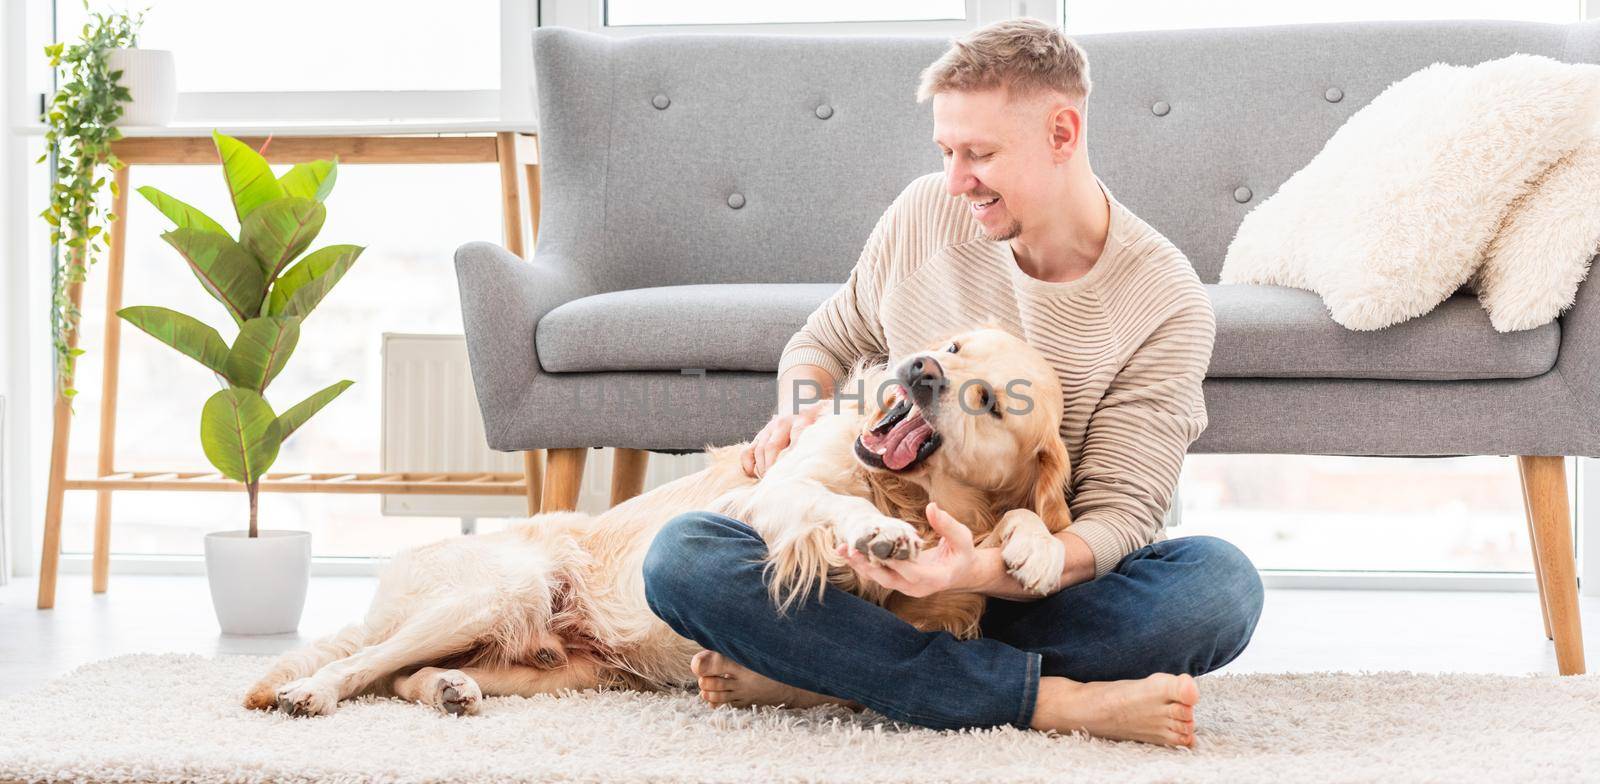 Man playing with golden retriever dog sitting on the floor in sunny apartment. Doggy shows teeth